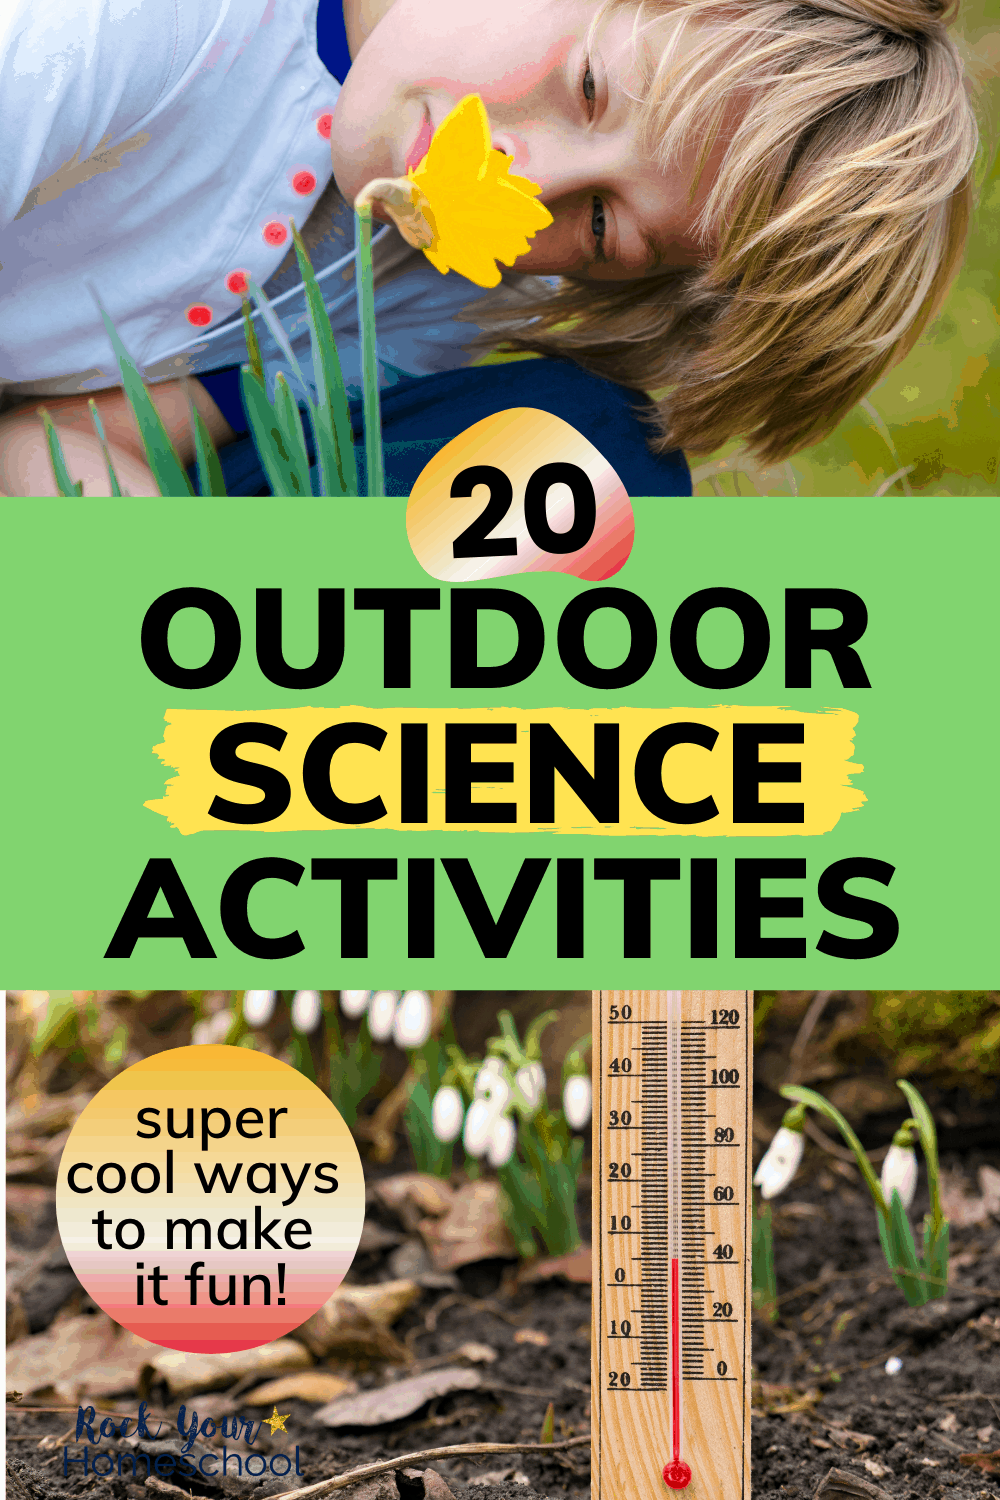 20 Super Cool and Fun Outdoor Science Activities Your Kids Will Love